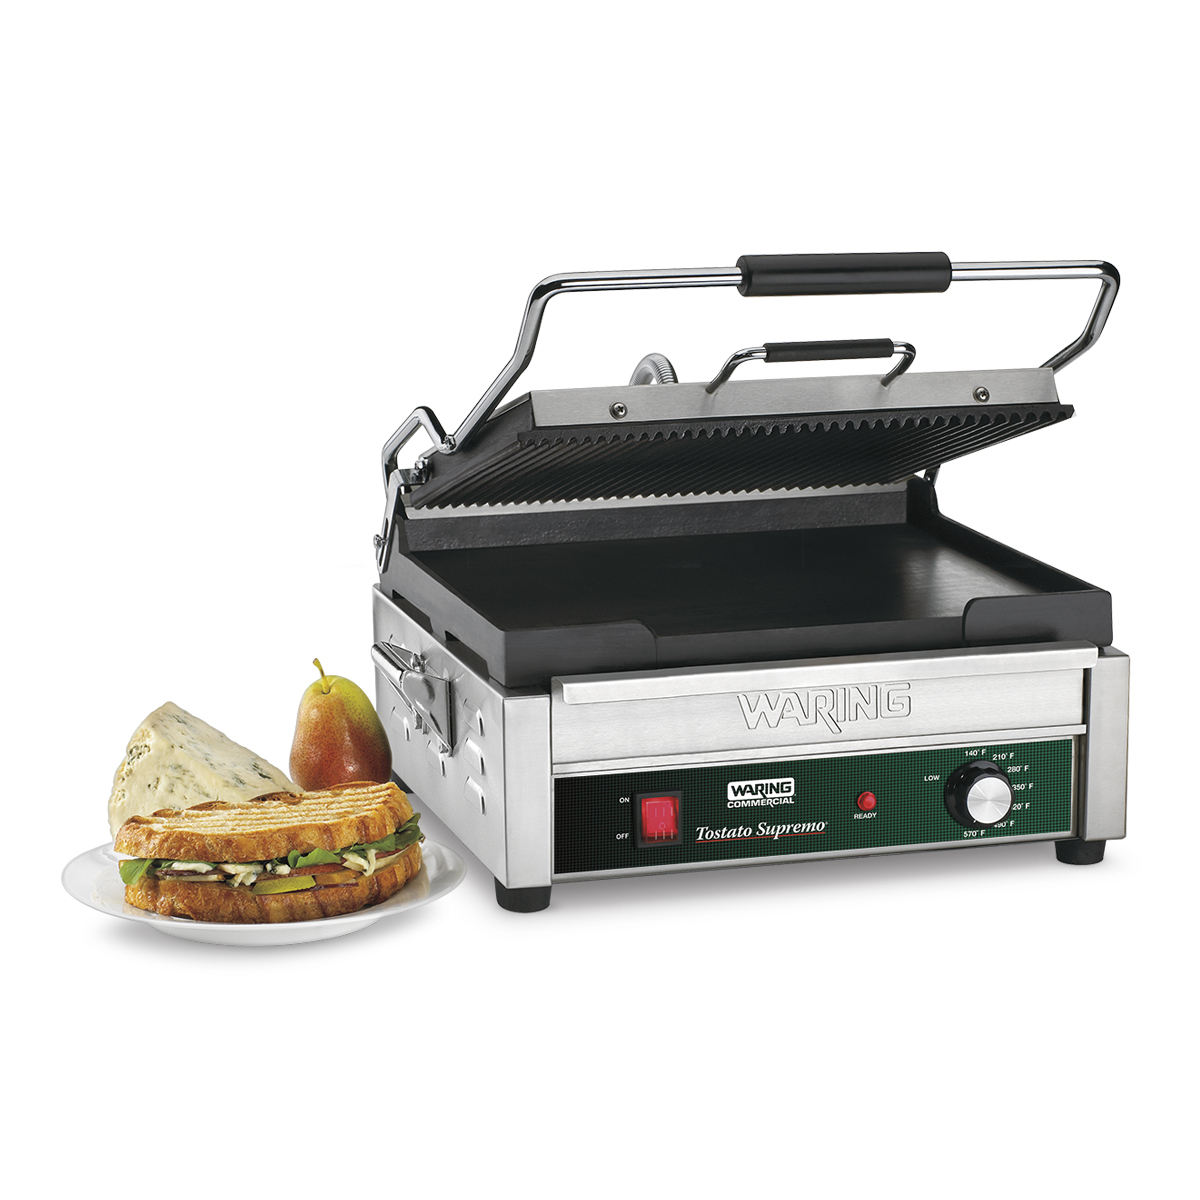 https://www.waringcommercialproducts.com/files/products/wdg250-waring-panini-grill-inset1.jpg